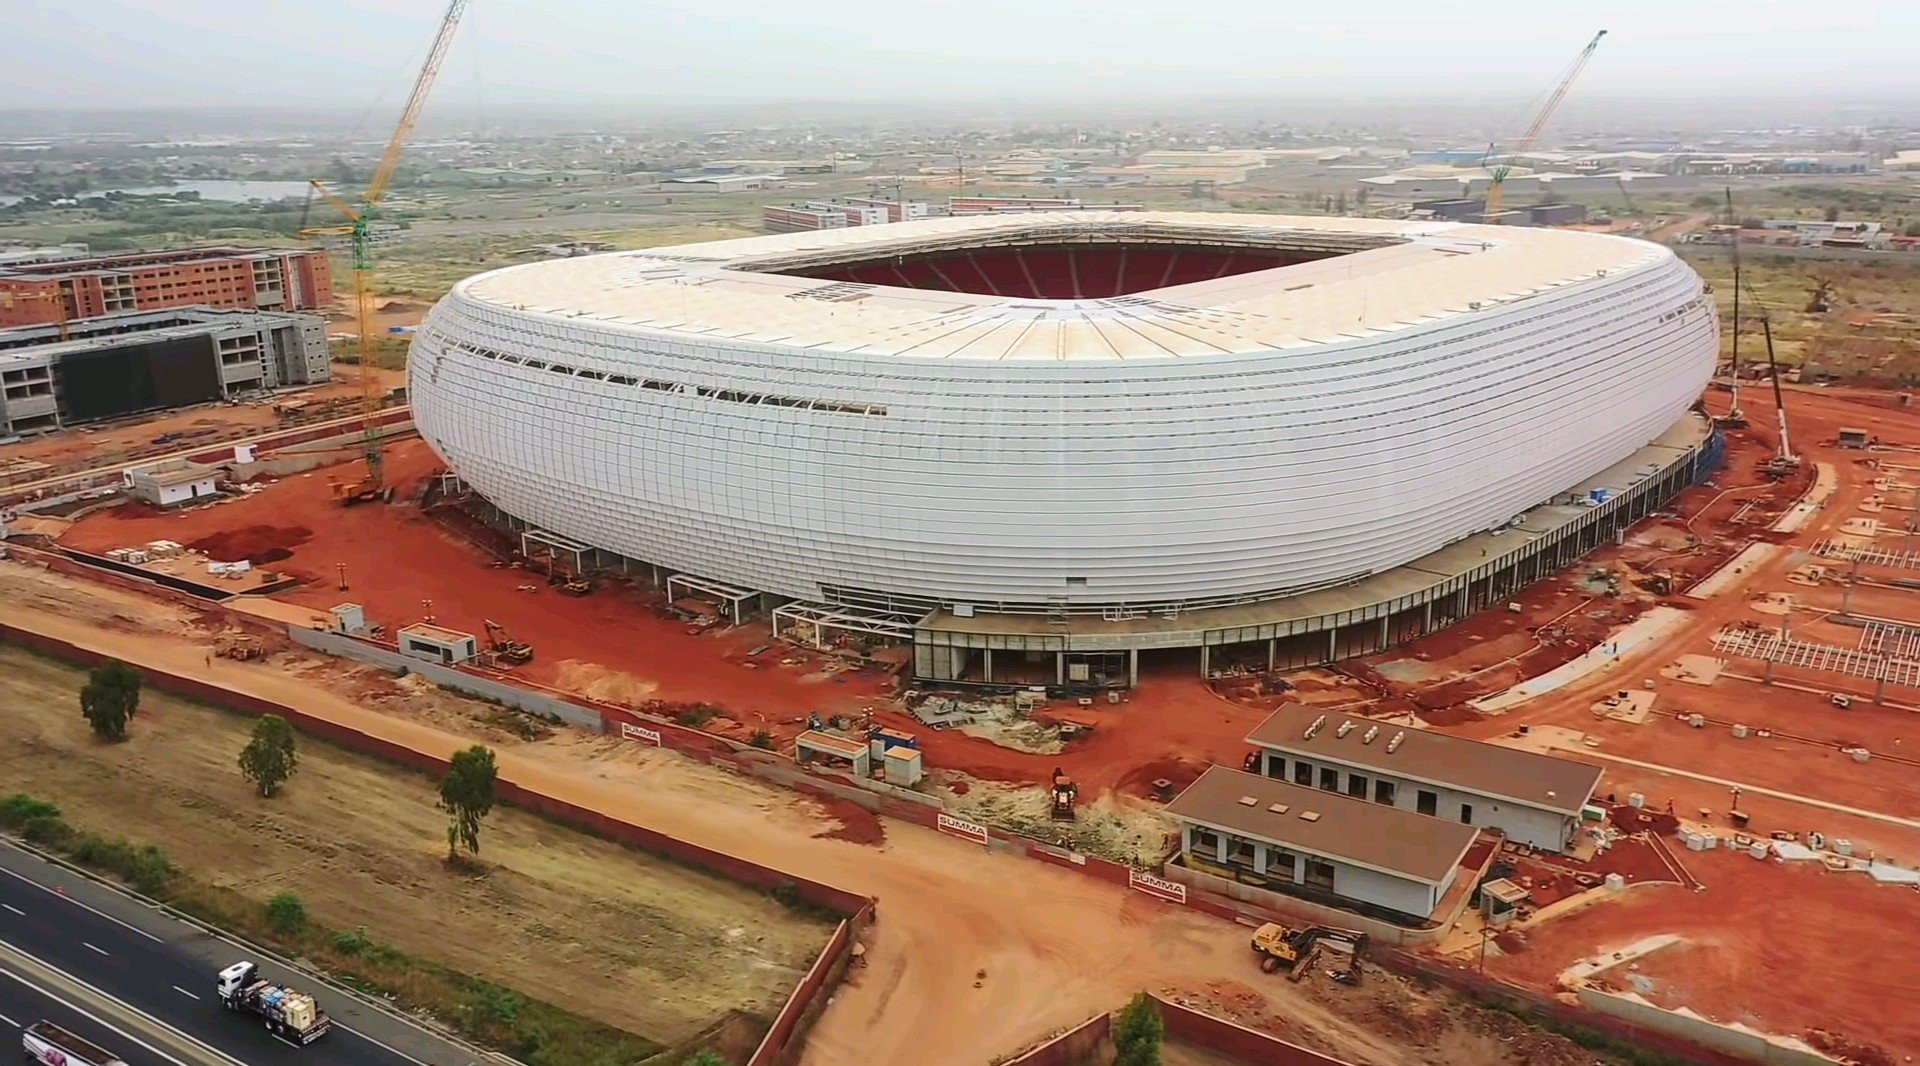 The Diamniadio Olympic Stadium is set to be the main venue for the 2026 Summer Youth Olympic Games in Dakar ©Summa